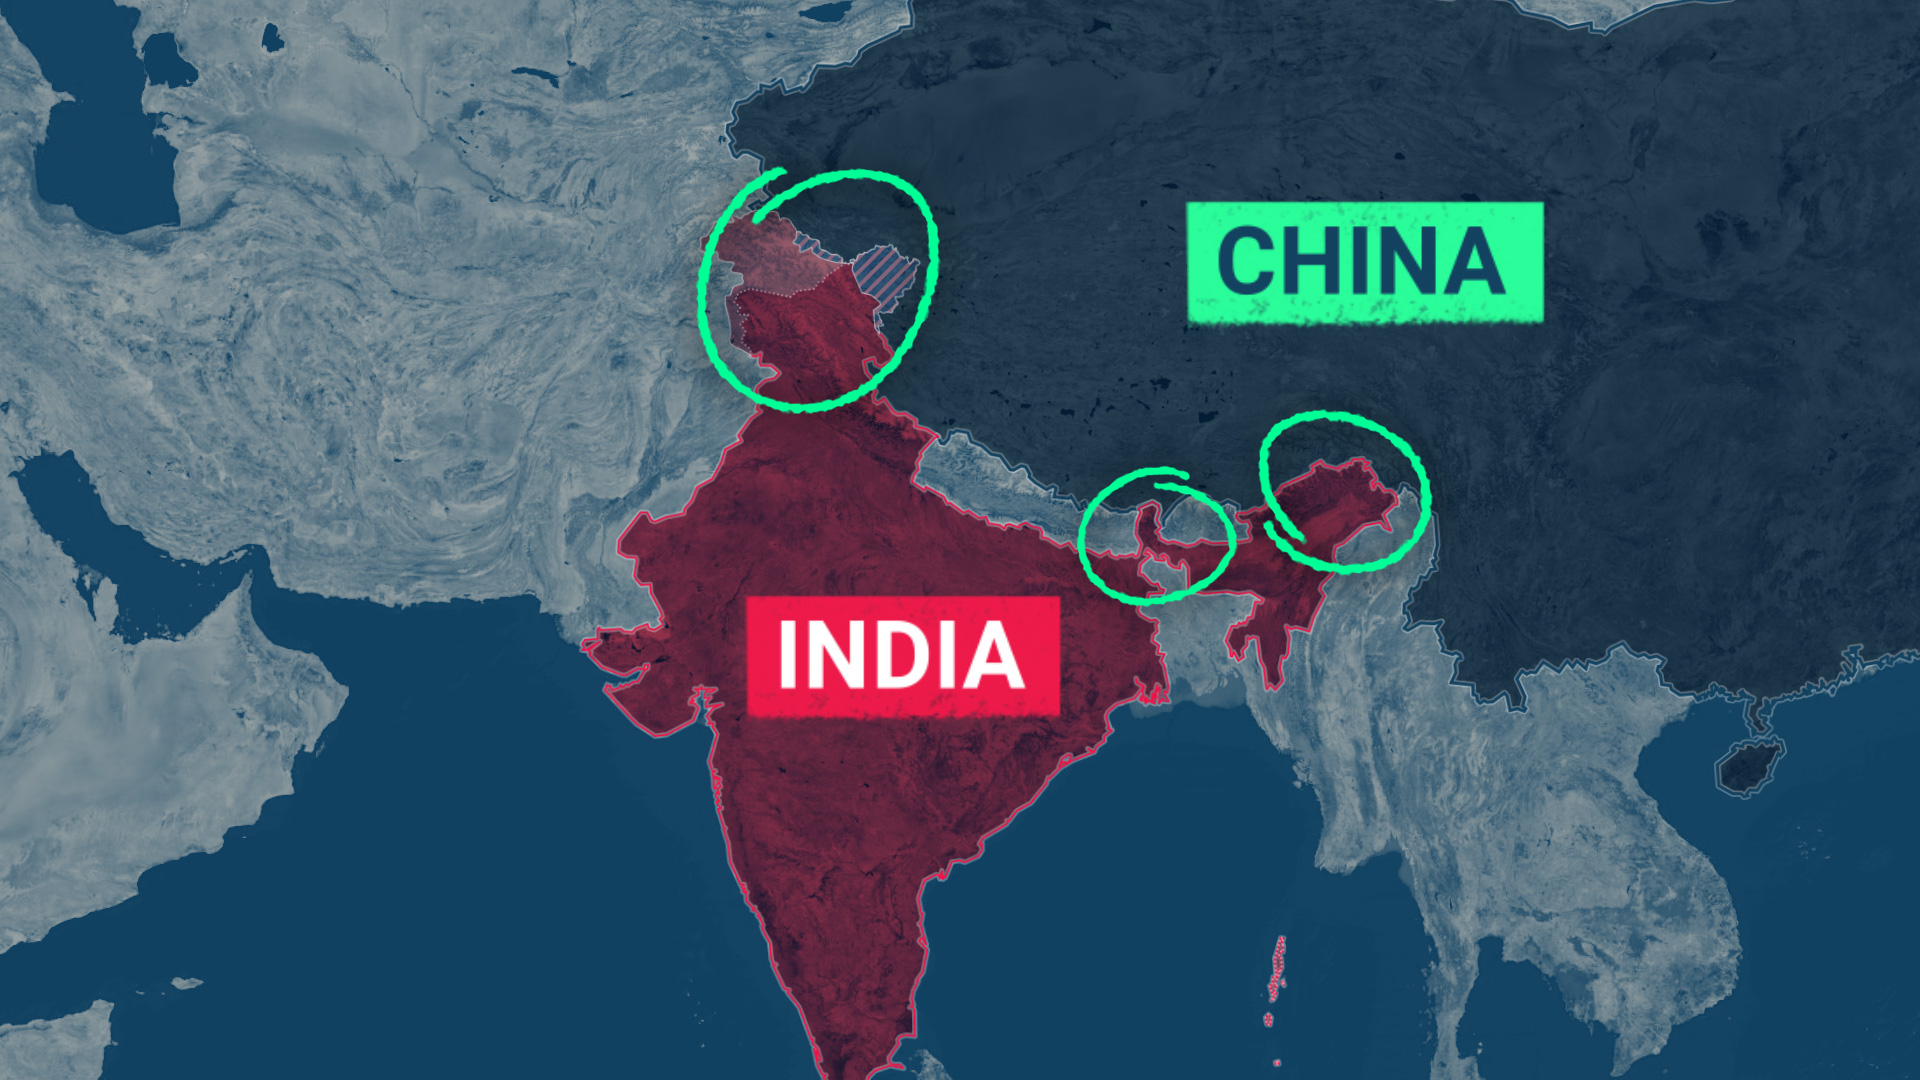 What the ChinaIndia Border Dispute is Really About Bloomberg